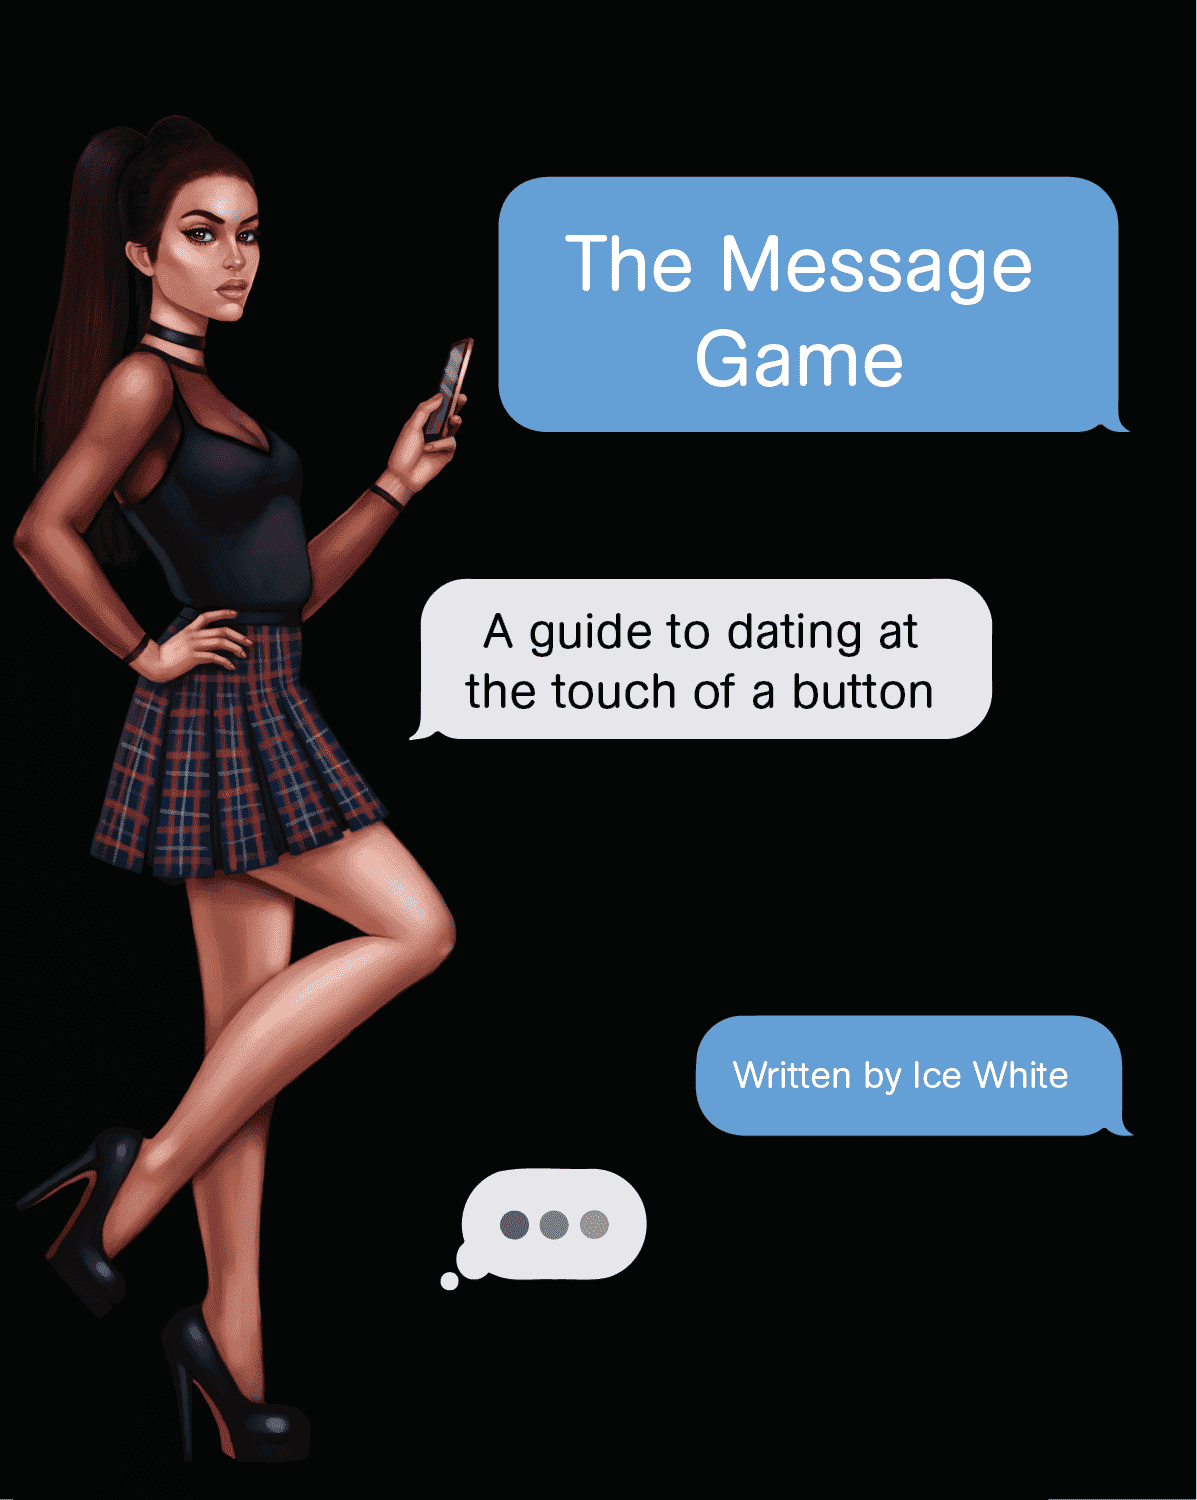 The Message Game Tinder Guide Texting Text App Algorithm Tips Book Ice White